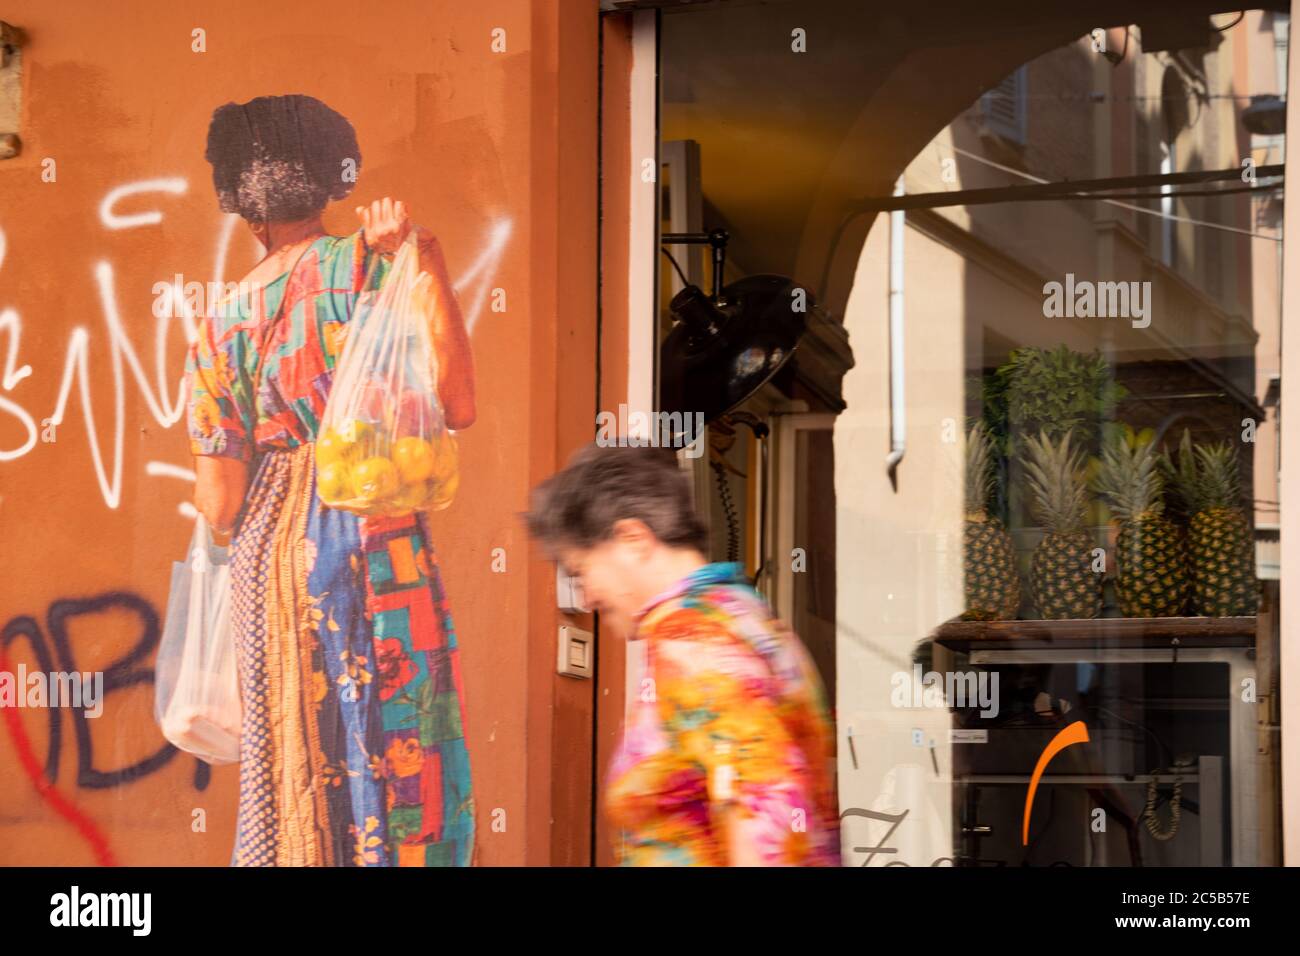 Blurred woman wearing a colorful summer dress passing by on a street of the old city center. Bologna, Italy. Stock Photo